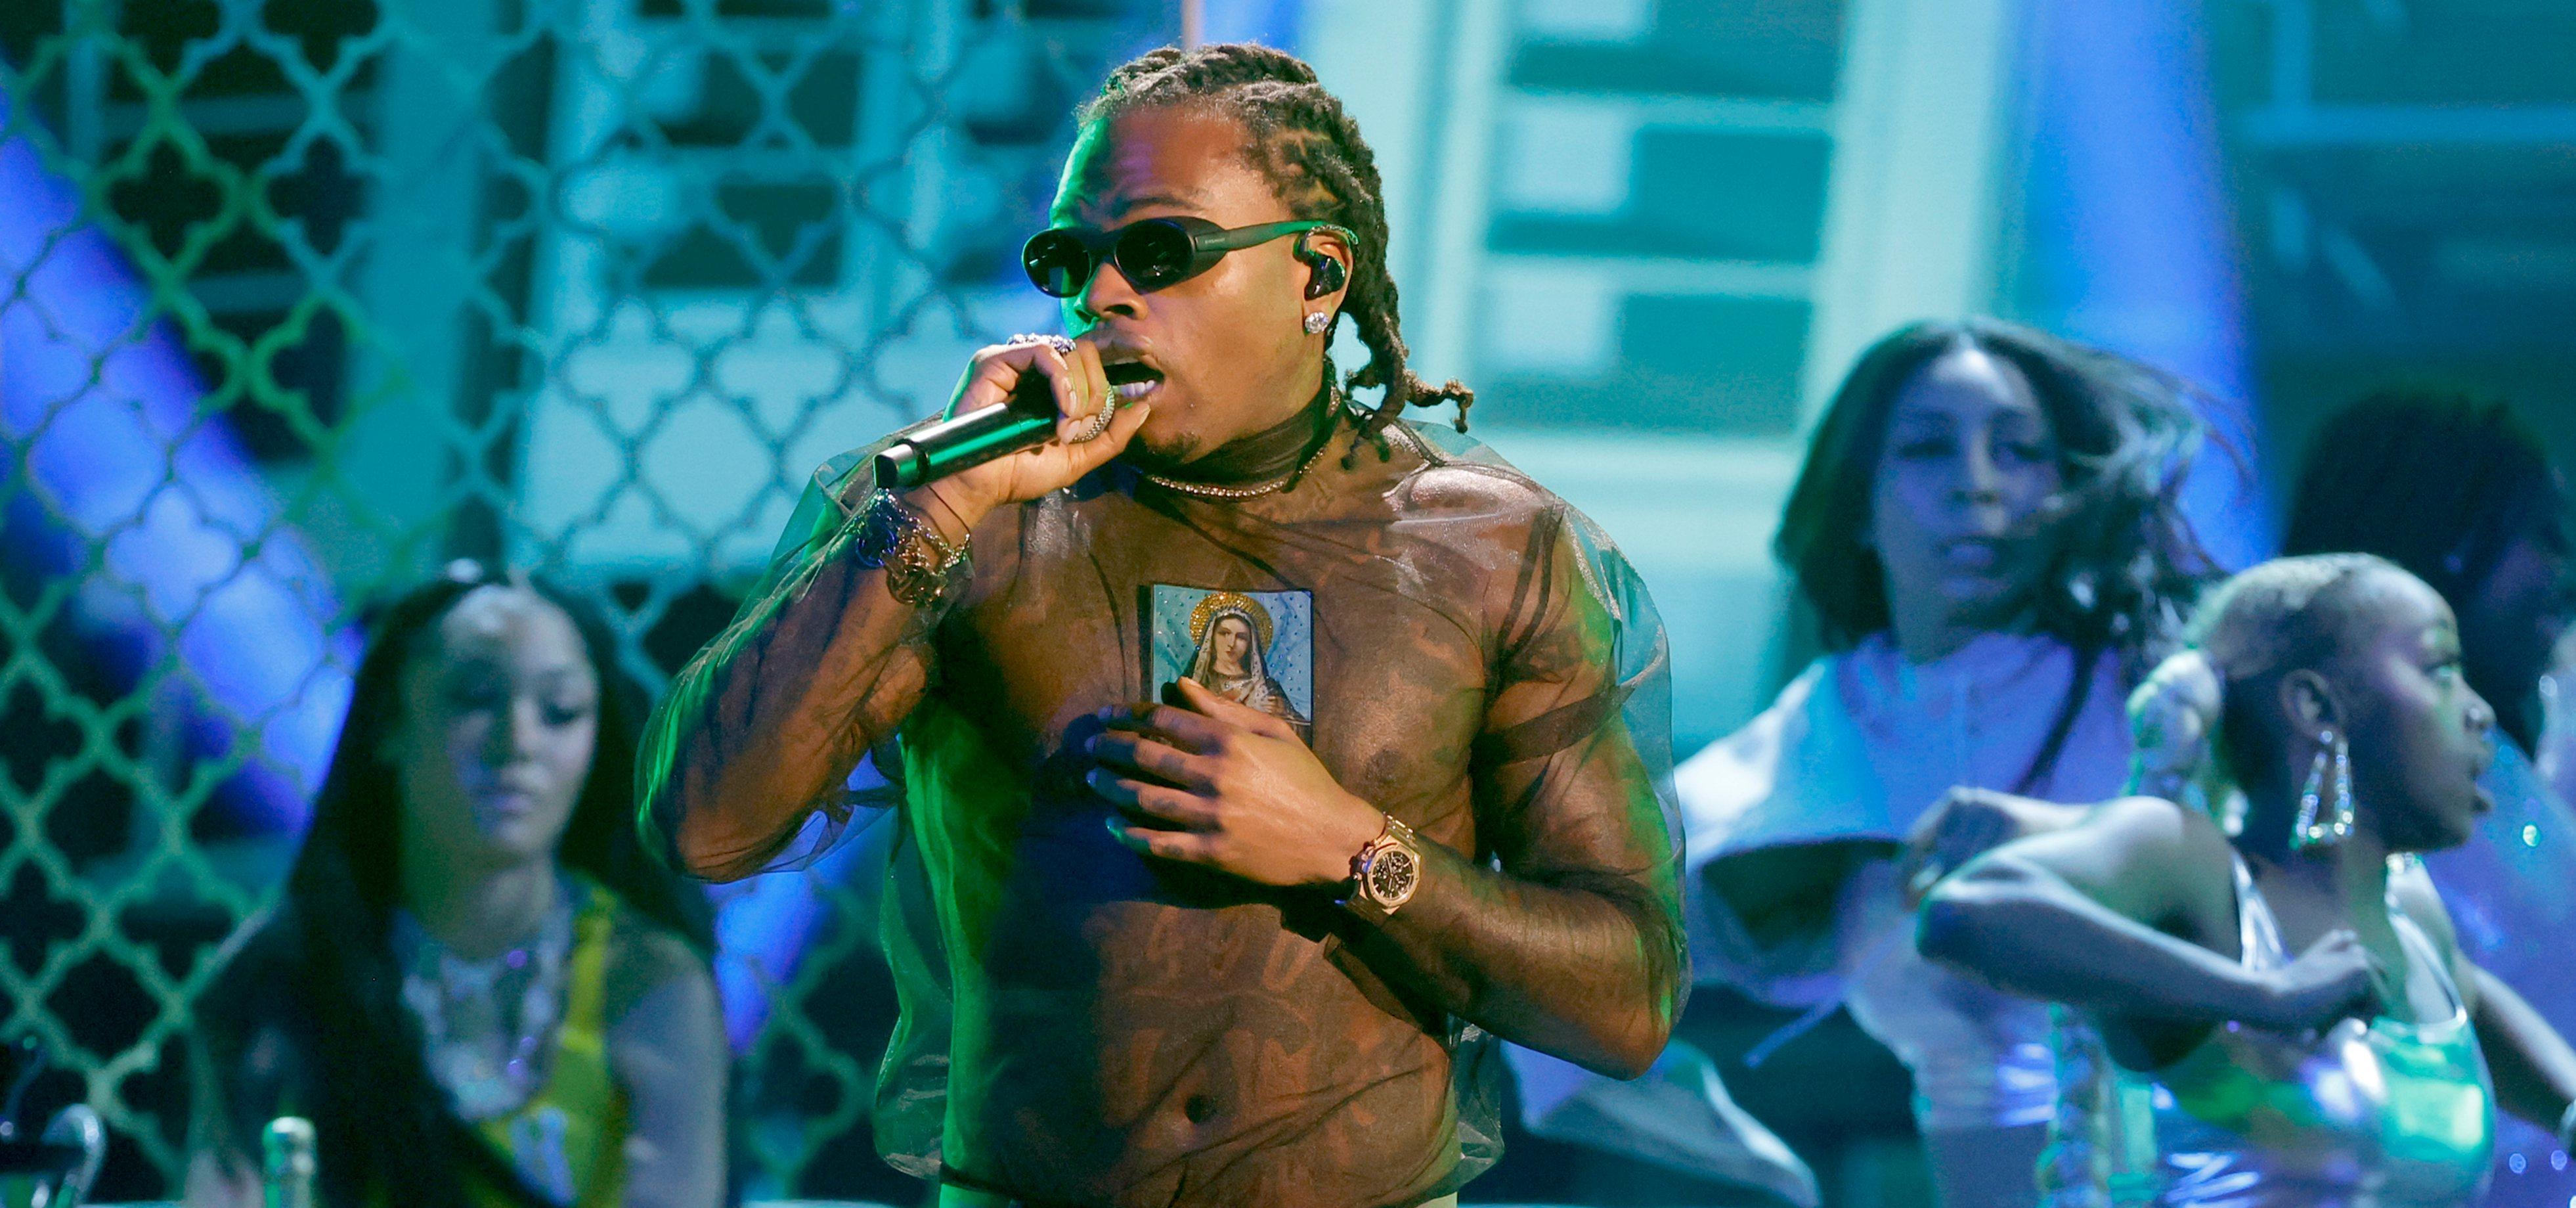 Gunna performs onstage during A GRAMMY Salute to 50 Years of Hip-Hop.